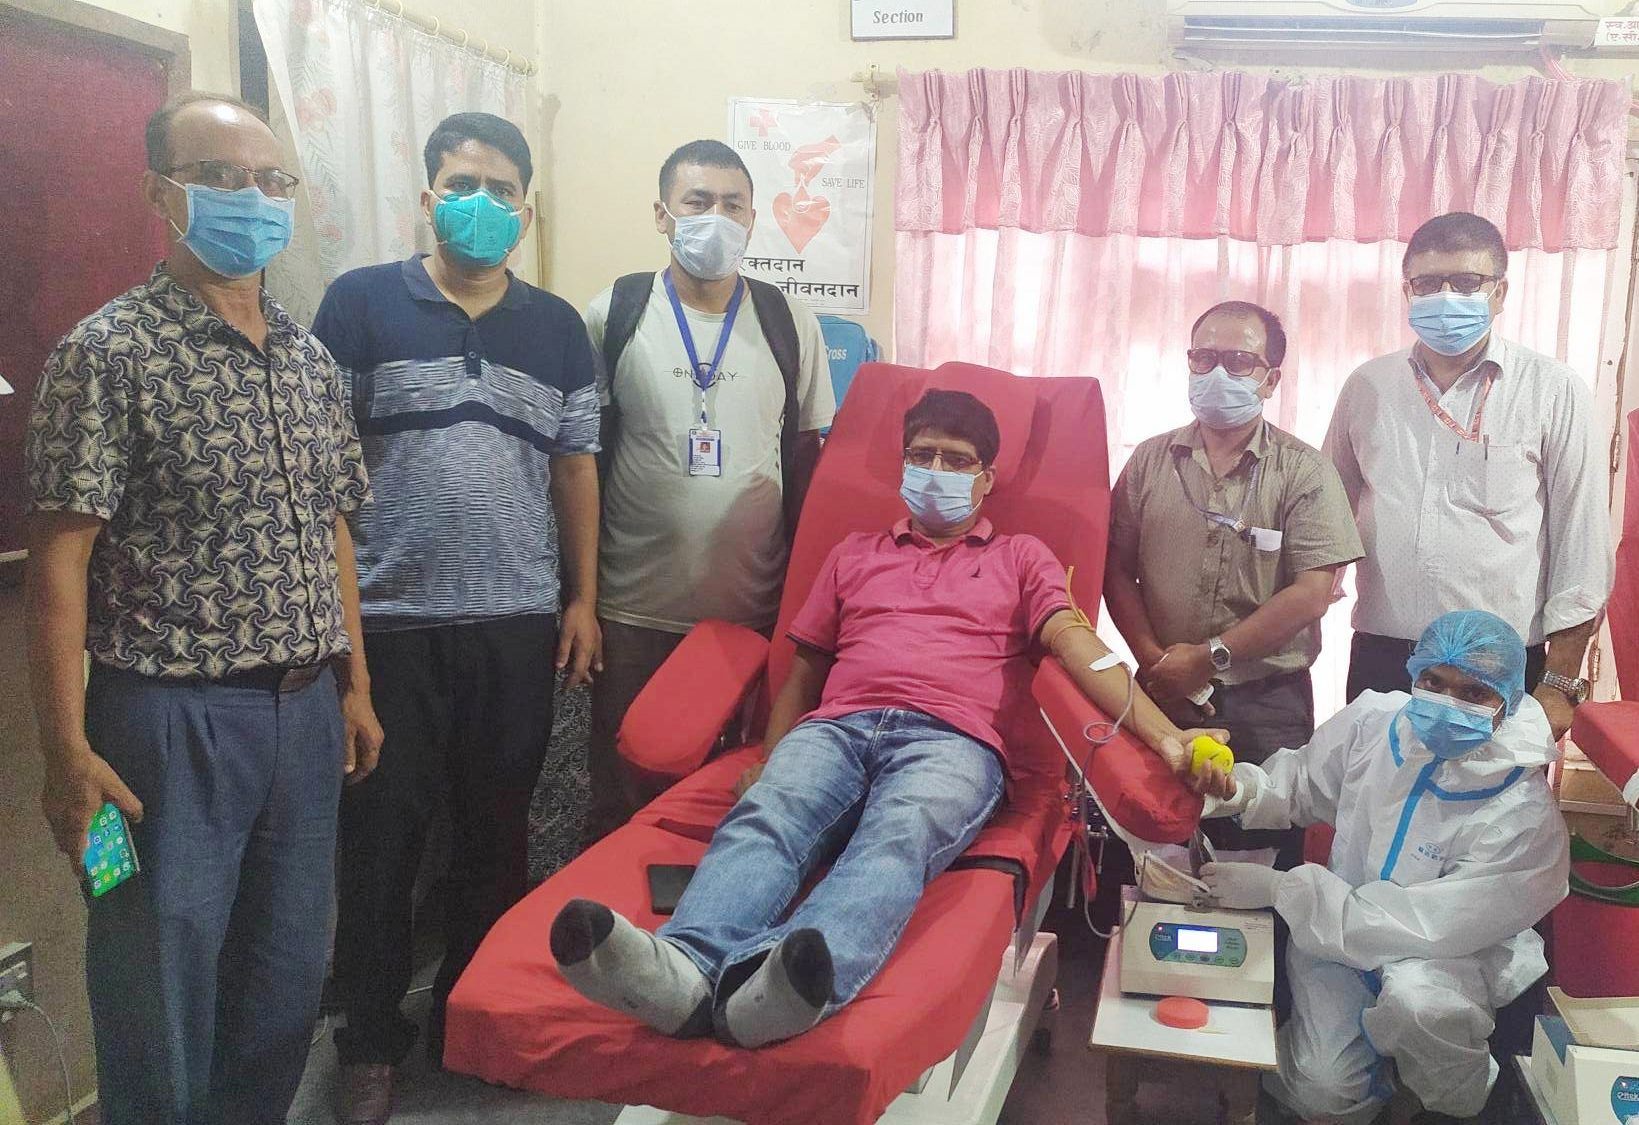 Plasma Therapy Started Also In Nepalgunj, Ward Chair Comes First To Donate Blood For Plasma